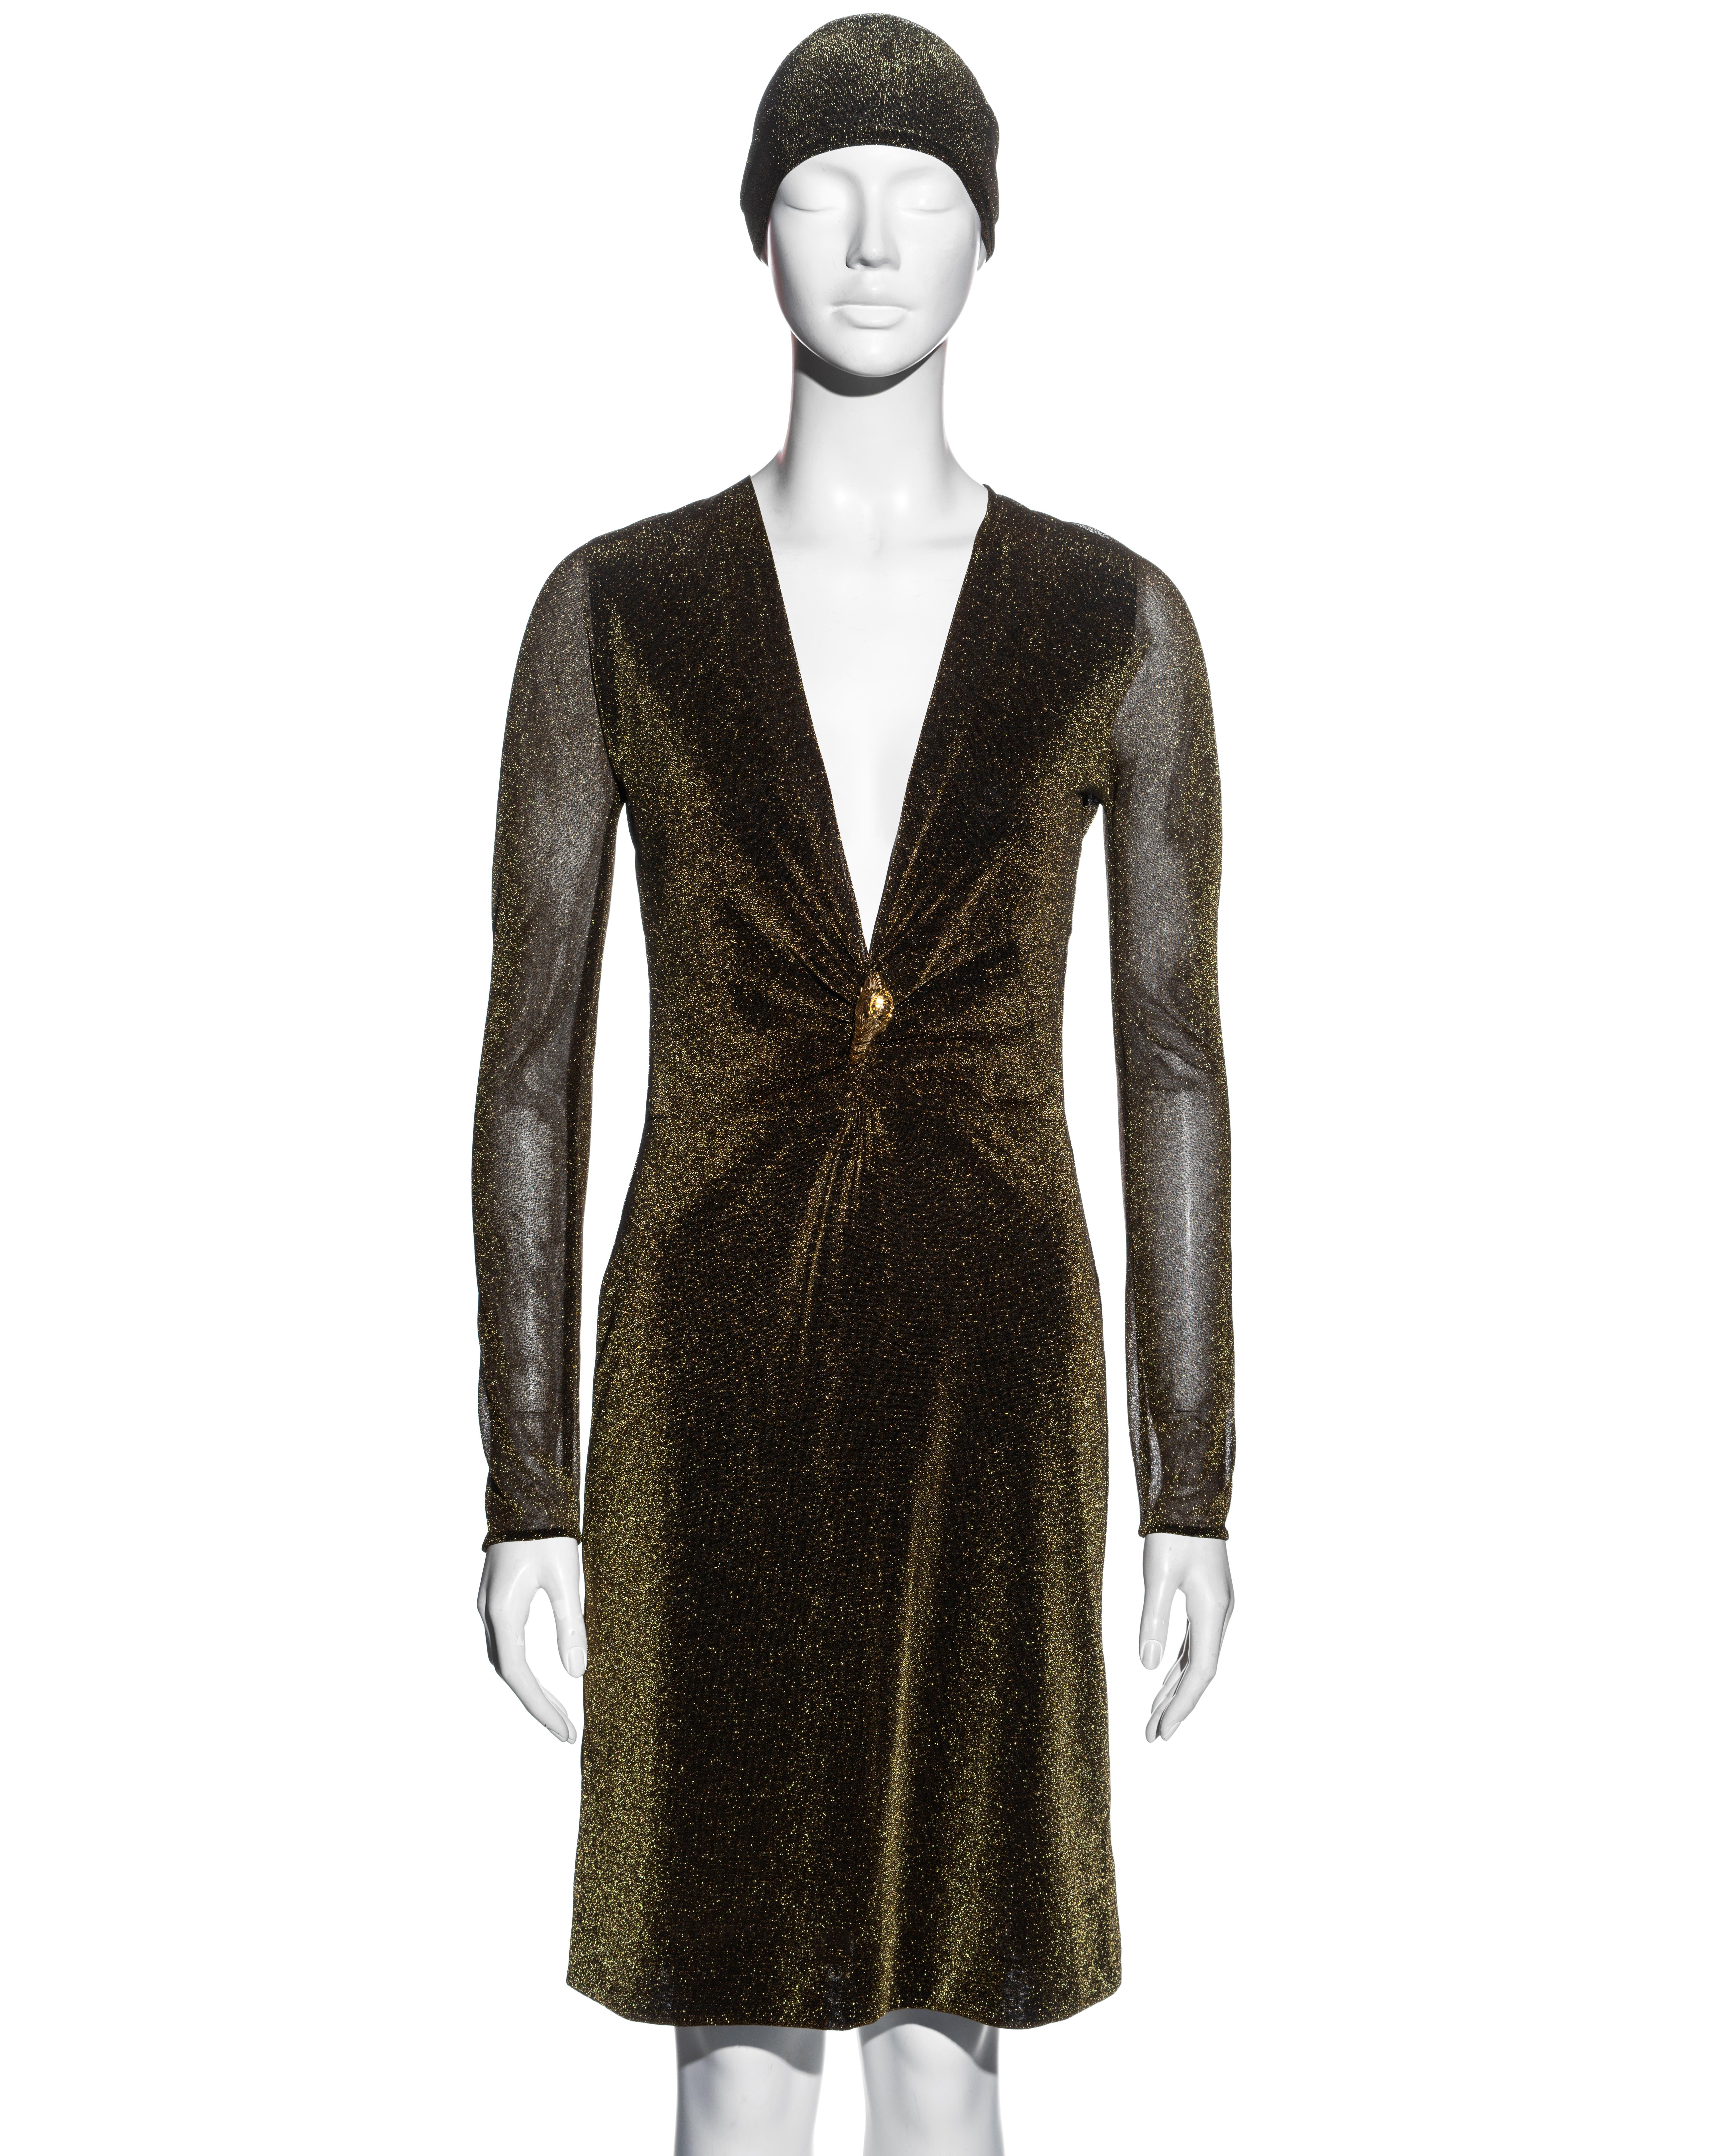 ▪ Gucci gold lurex evening shift dress and headscarf set
▪ Designed by Tom Ford
▪ Plunging v-neck 
▪ Gold dragon broach 
▪ Long-sleeves
▪ Knee-length skirt 
▪ Matching headscarf
▪ IT 38 - FR 34 - UK 6
▪ Fall-Winter 2000
▪ 54% Polyester, 46%